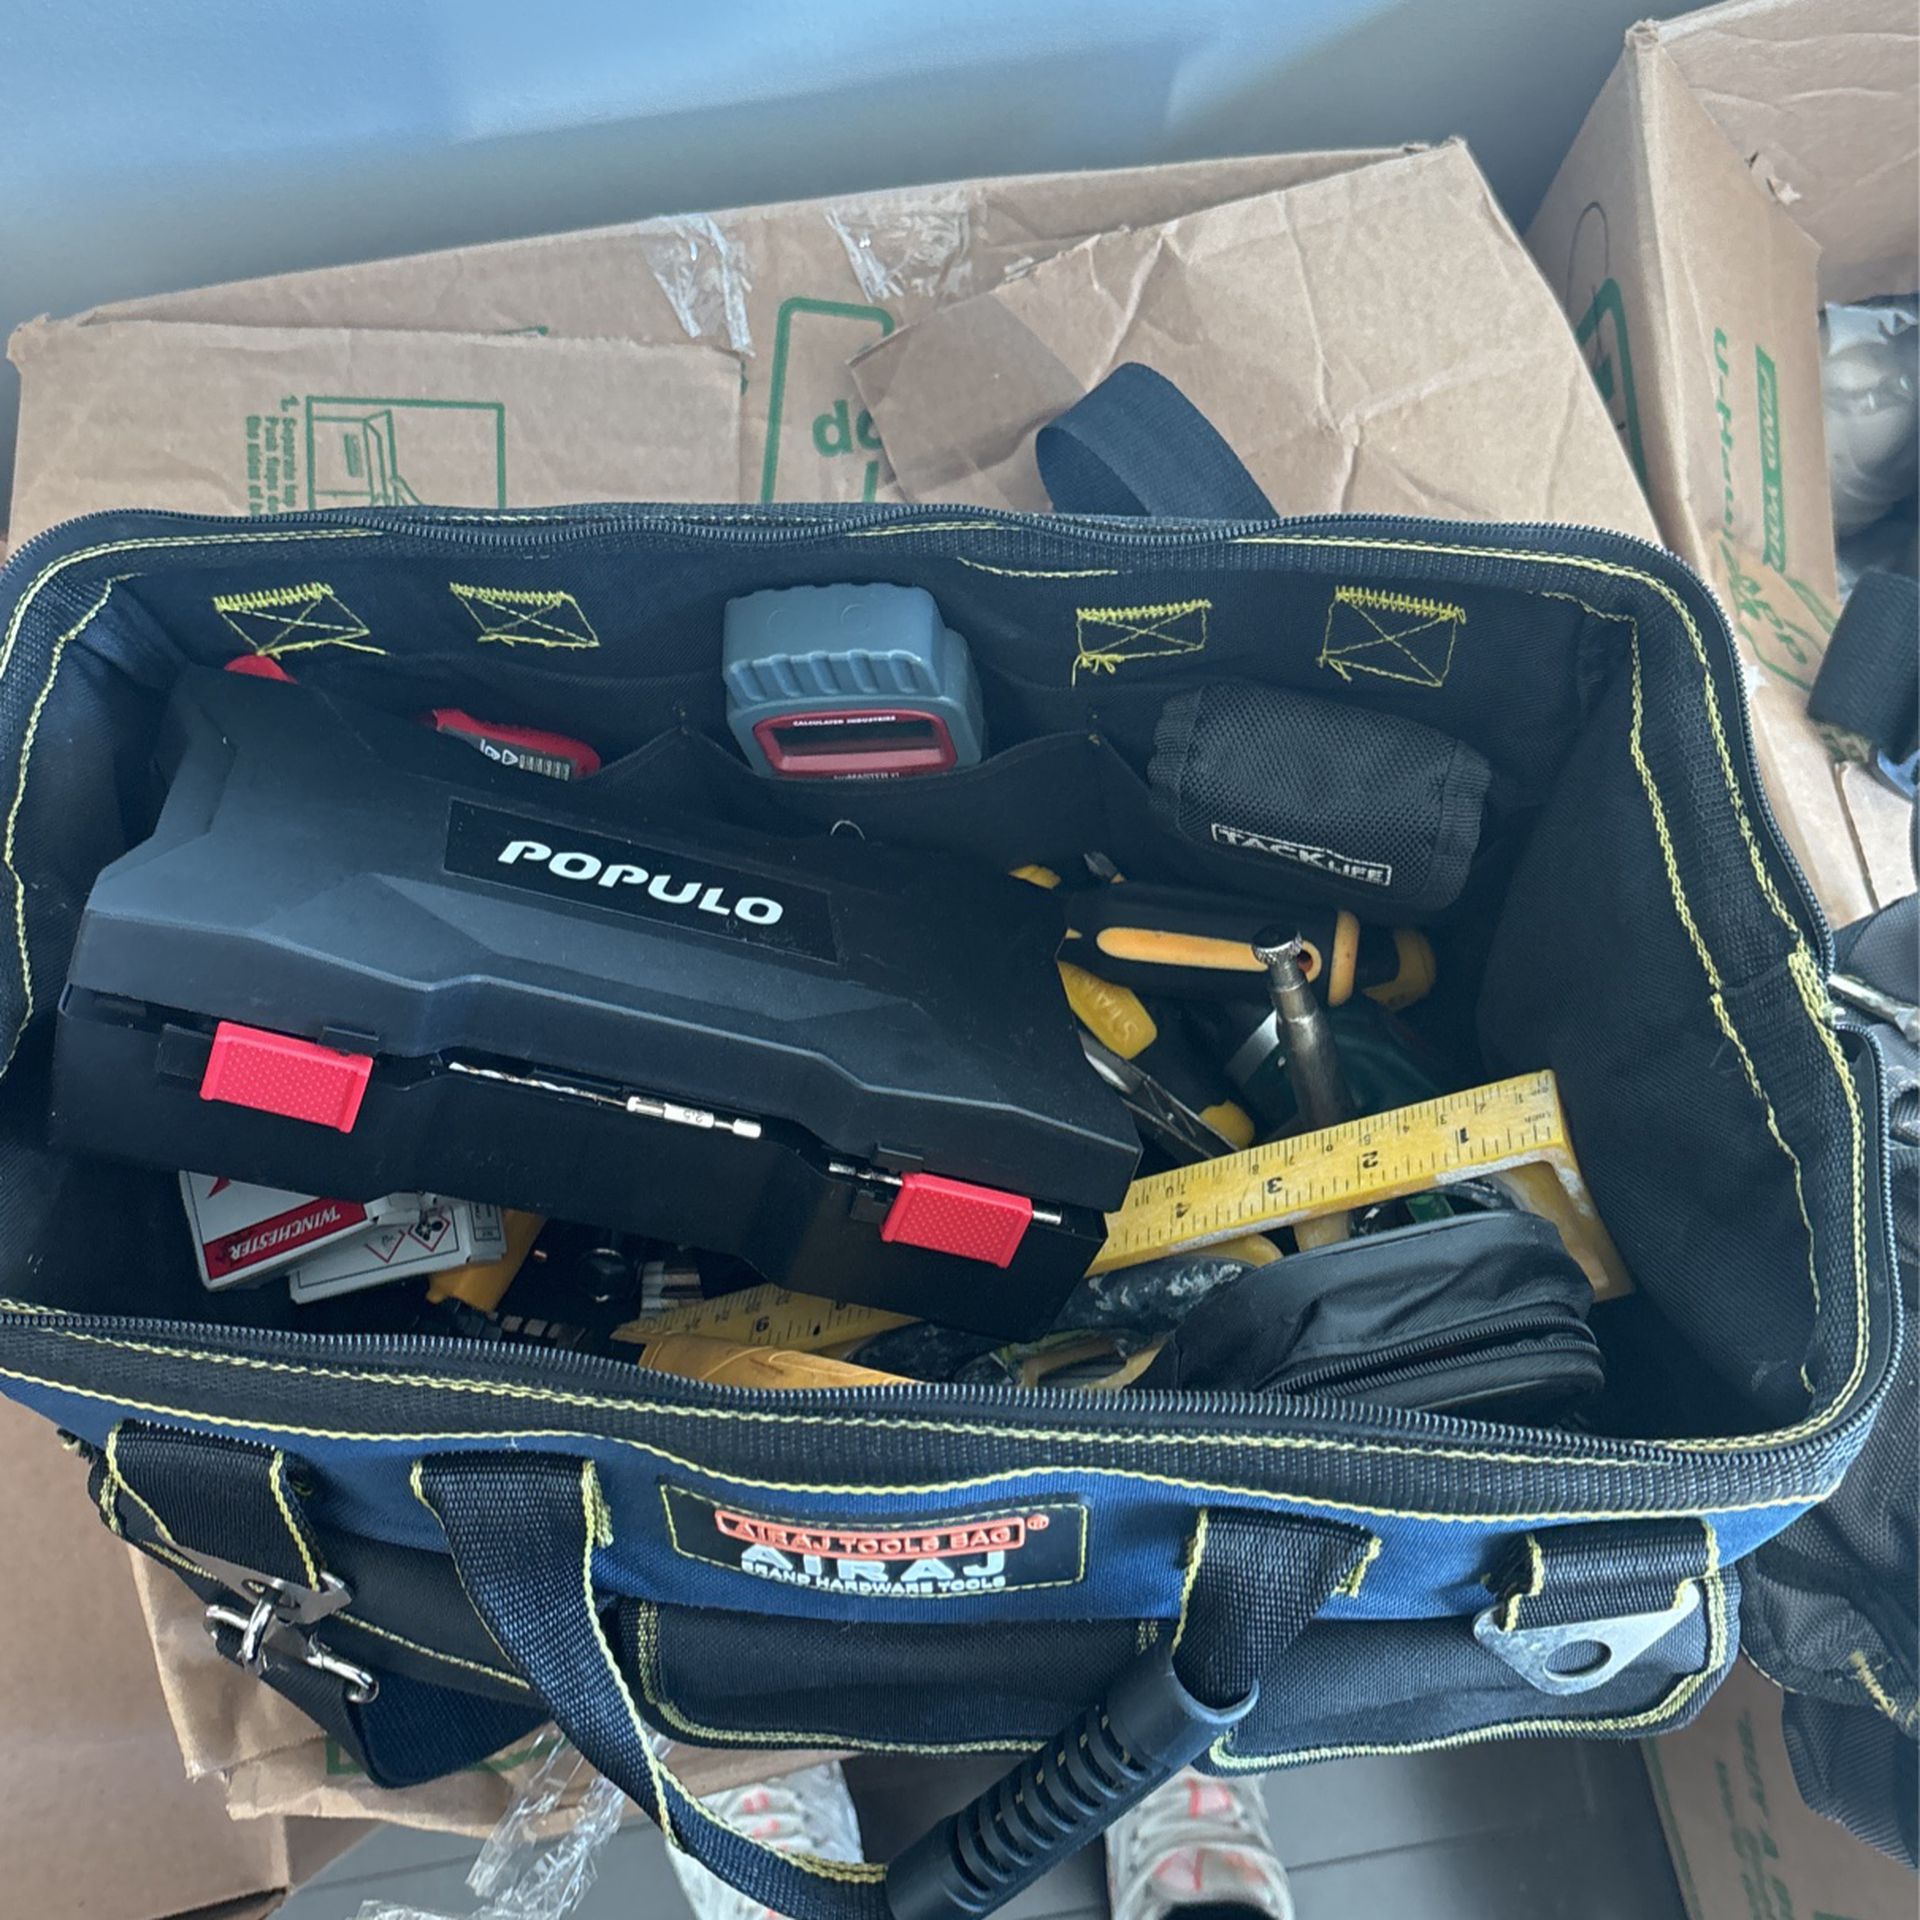 Tool Box With Everything Inside 